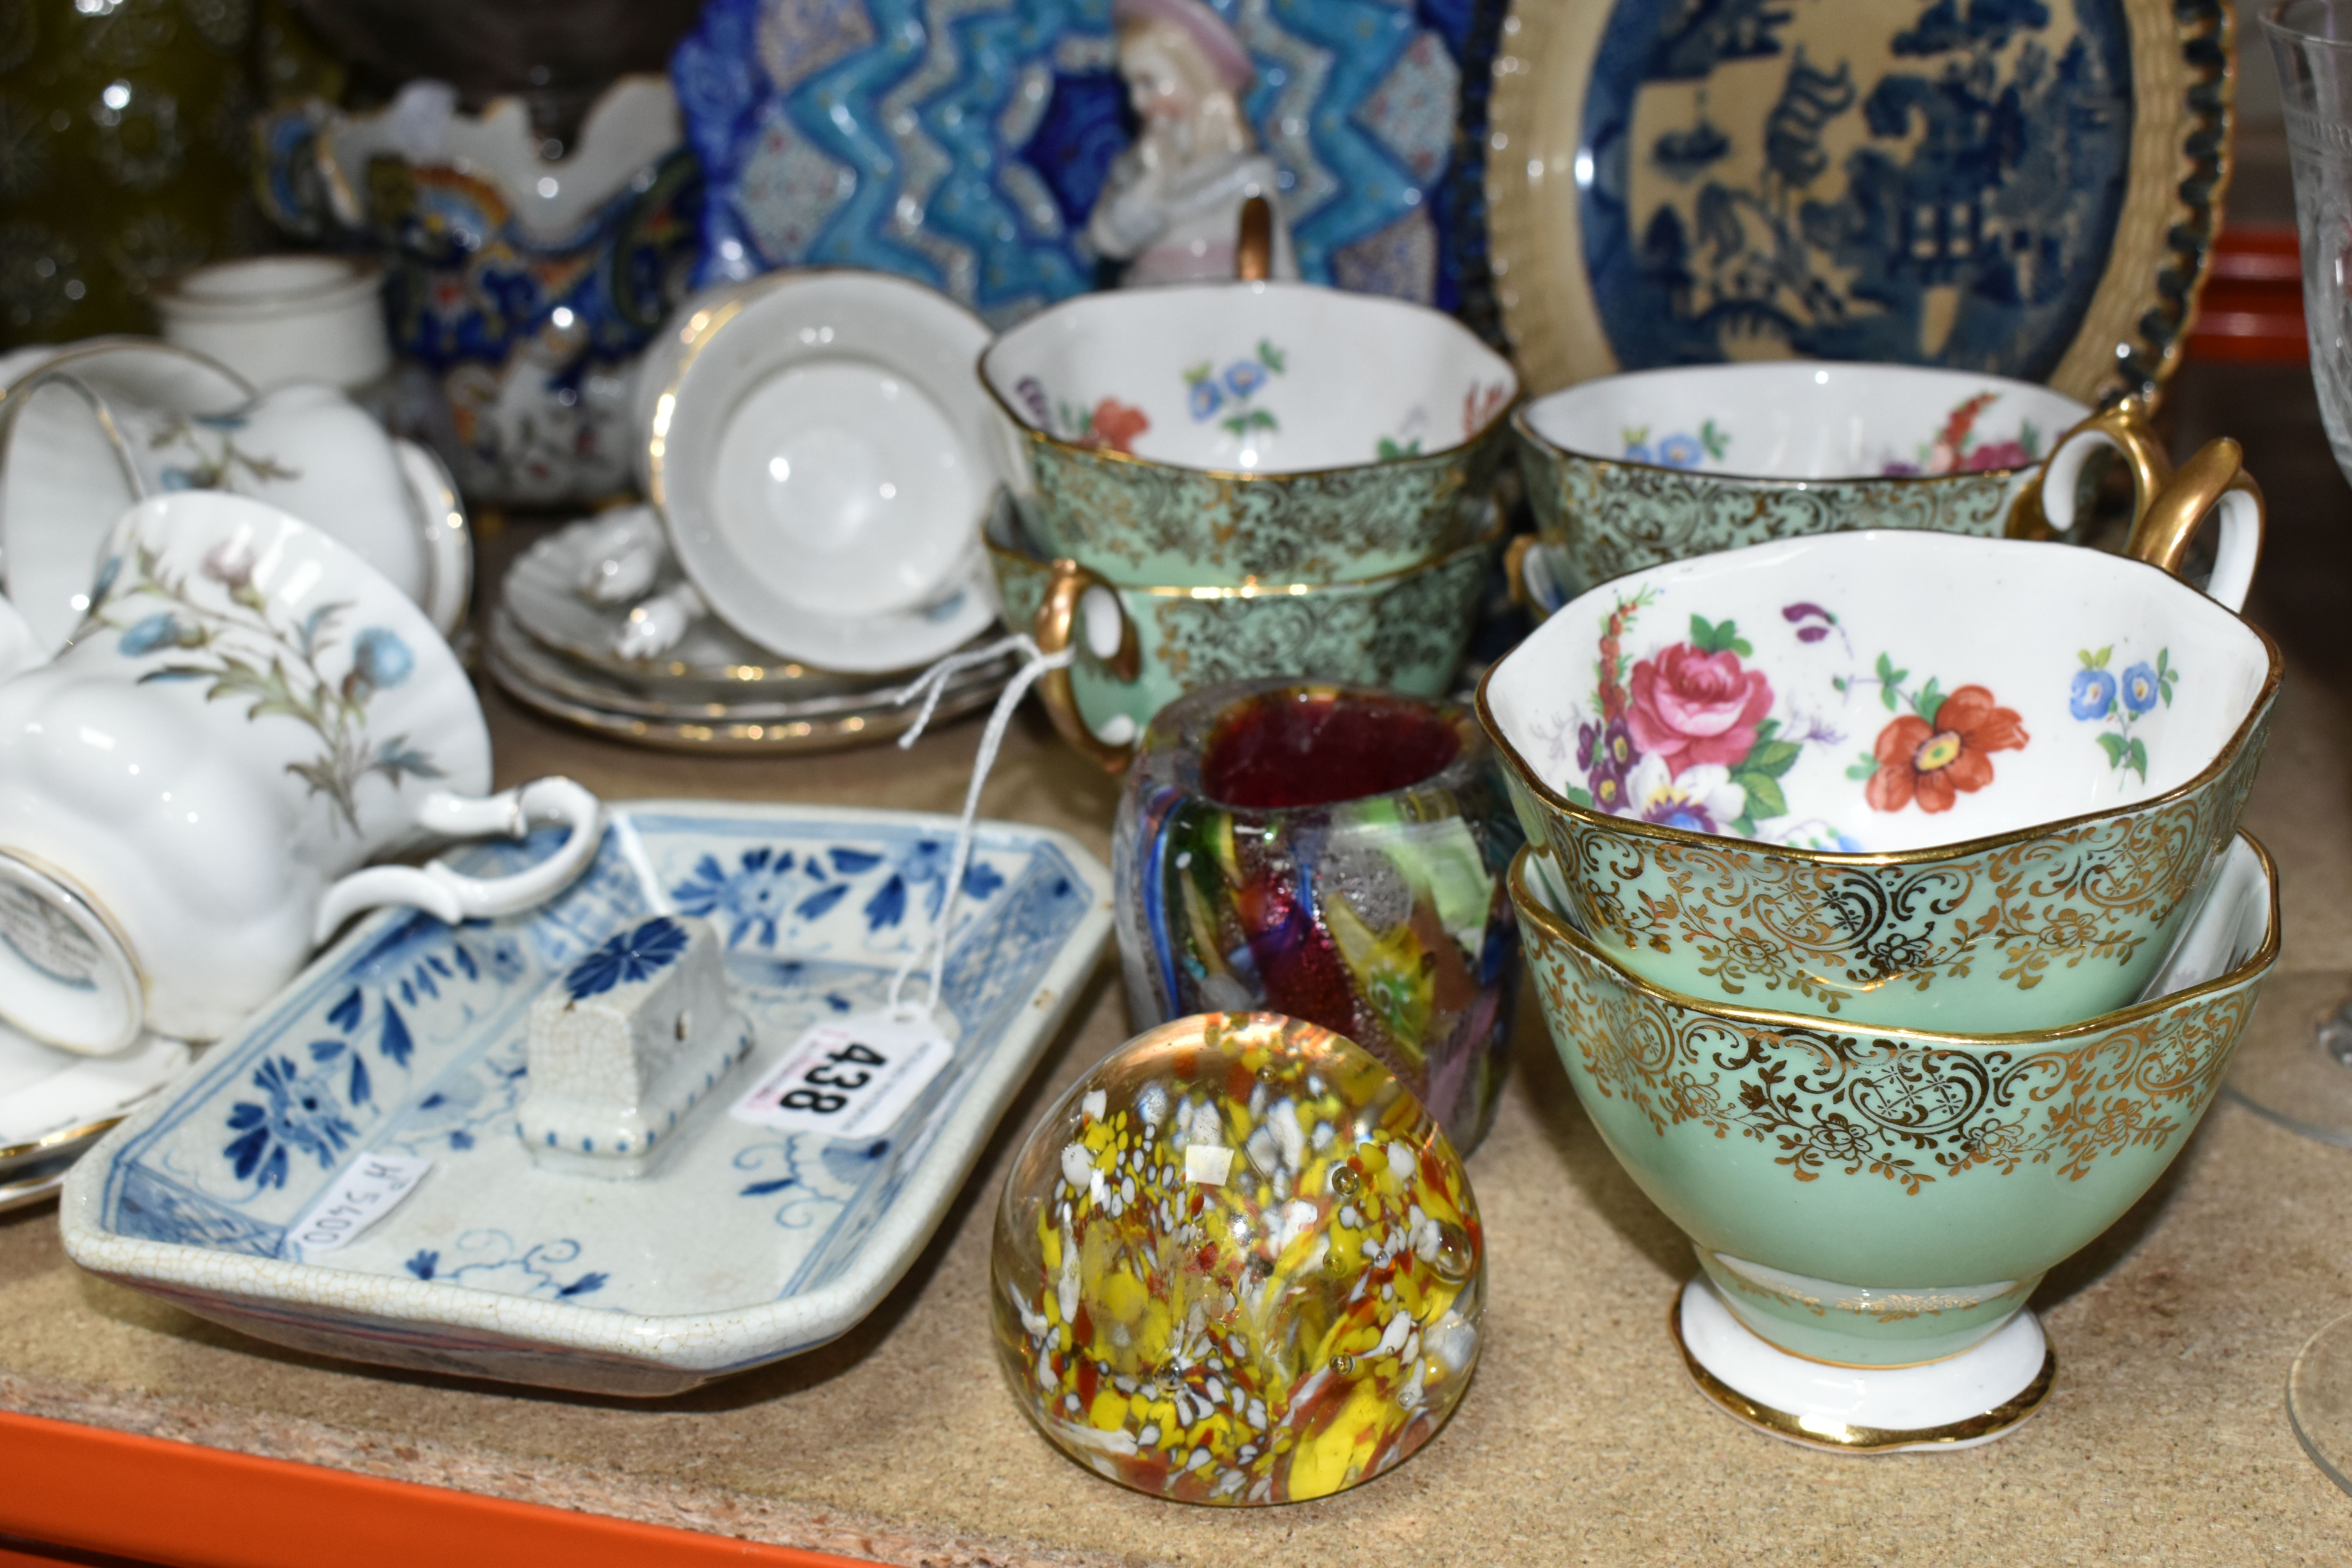 A VARIETY OF CERAMICS AND GLASSWARE INCLUDING A ROYAL ALBERT TEA SET, A VICTORIAN GLASS DUMP - Image 2 of 6